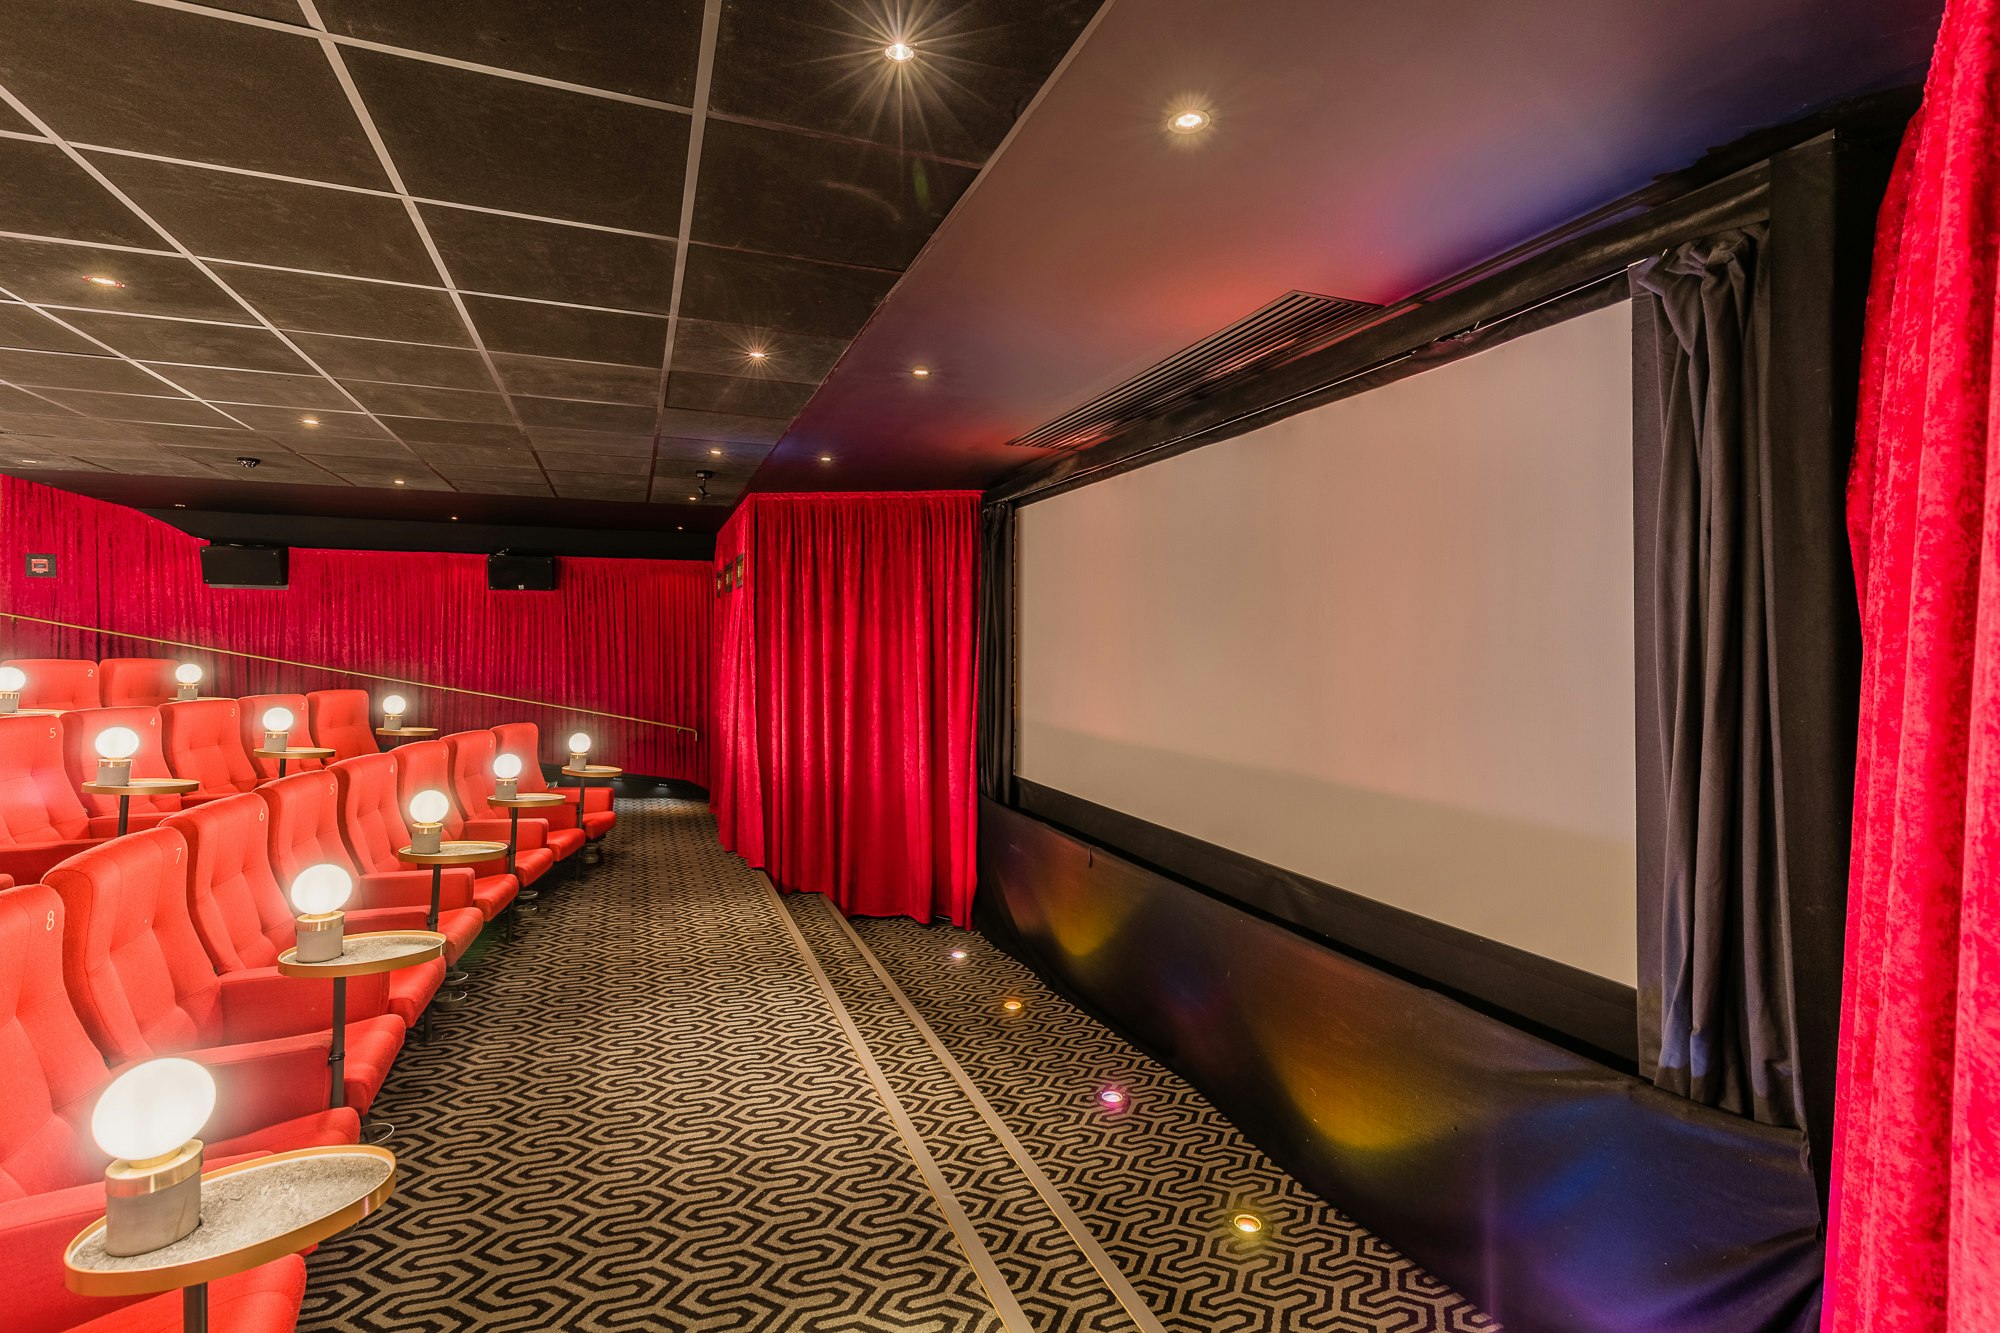 Curzon Mayfair - Screen Two image 1